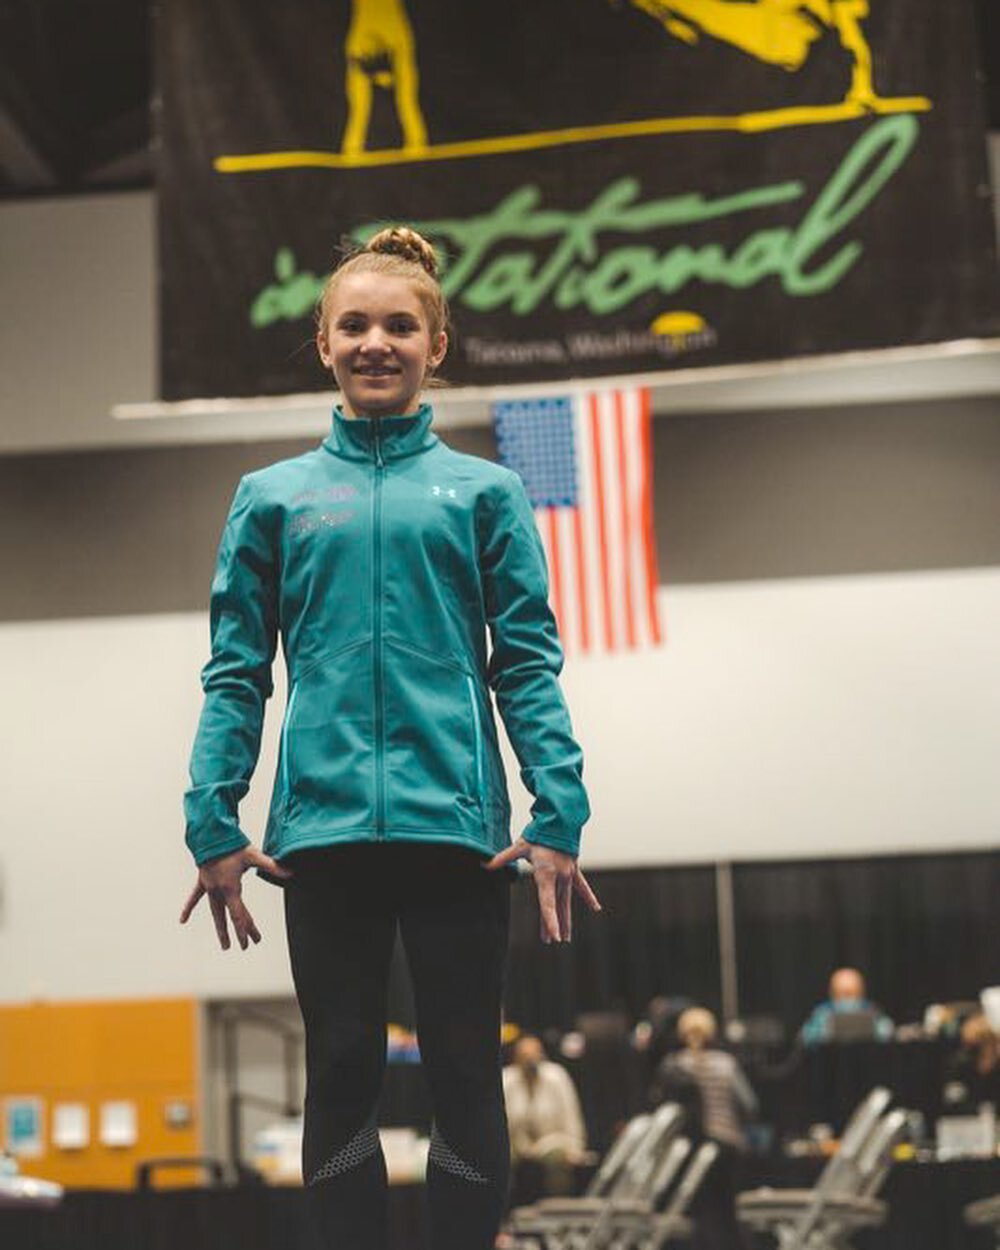 Best of luck to CJ Keuneke of Active Athletics and Madelyn Williams of Dream Xtreme who will be competing in the Nastia Liukin Cup today! Both gymnasts qualified at #charitychoice2021 and we know they are going to shine 🤩 
&bull;
&bull;
#charitychoi